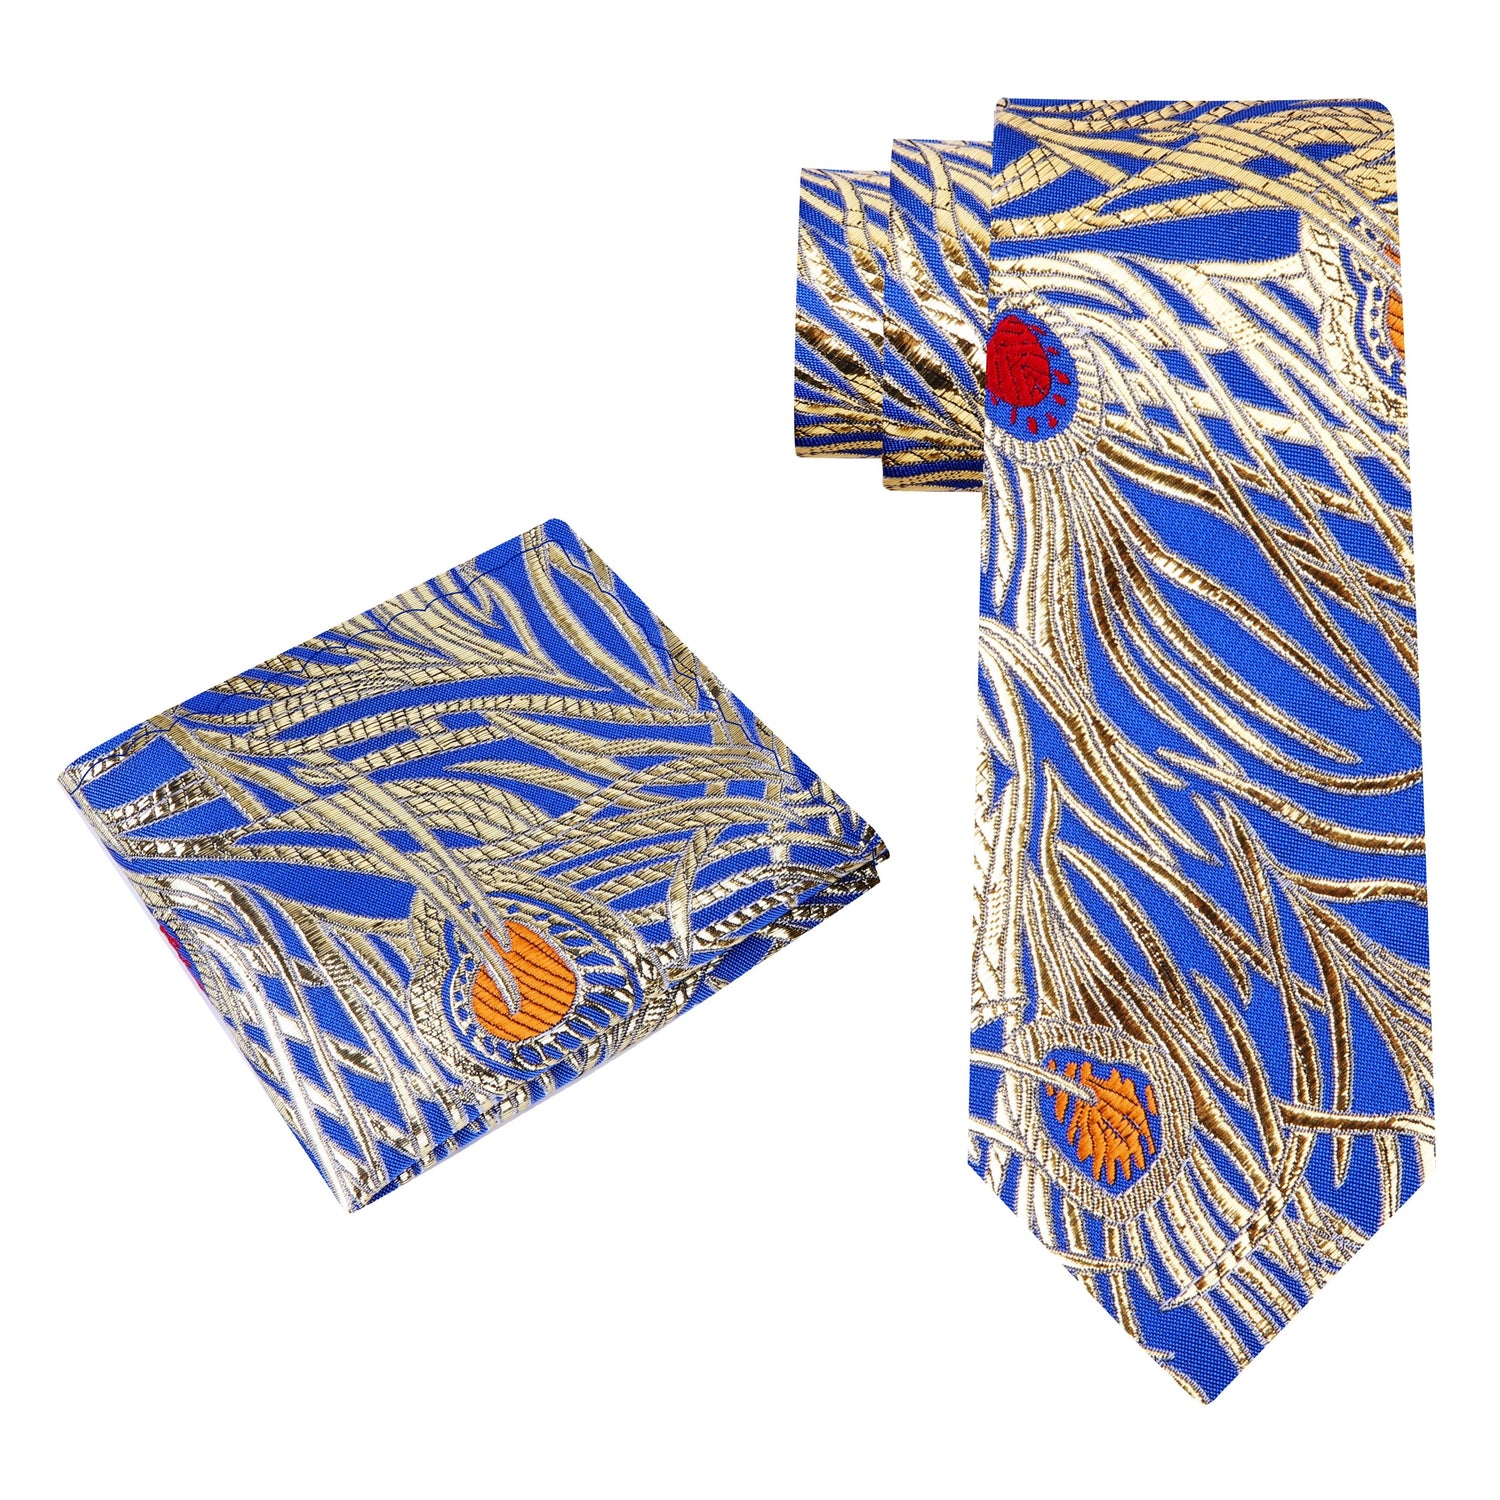 Alt View: A Bright Blue With Metallic Gold, Blue, Red And Orange Color Abstract Peacock Pattern Silk Necktie, Matching Silk Pocket Square